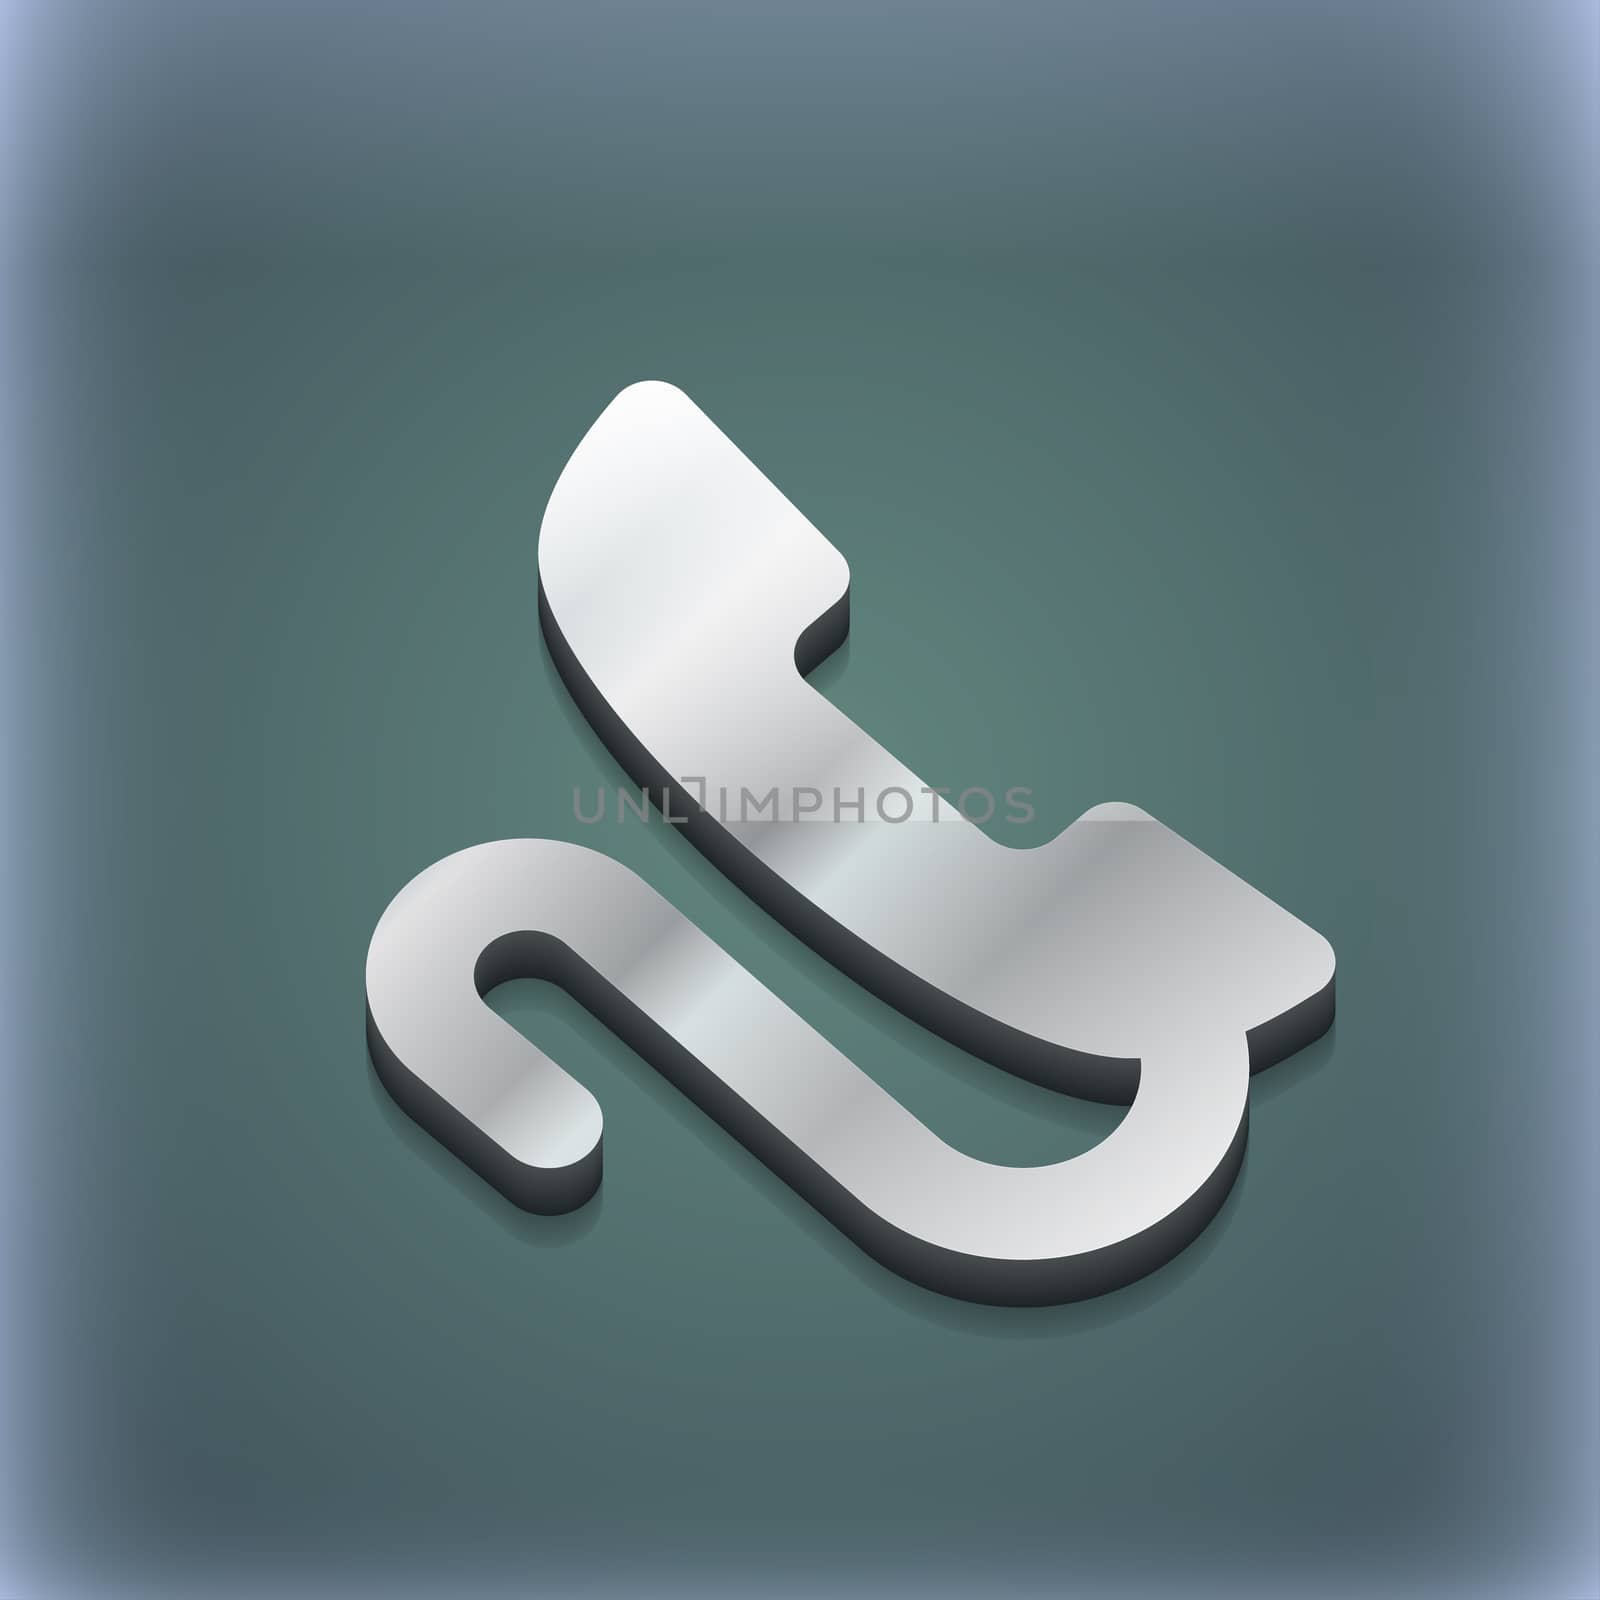 retro telephone handset icon symbol. 3D style. Trendy, modern design with space for your text illustration. Raster version